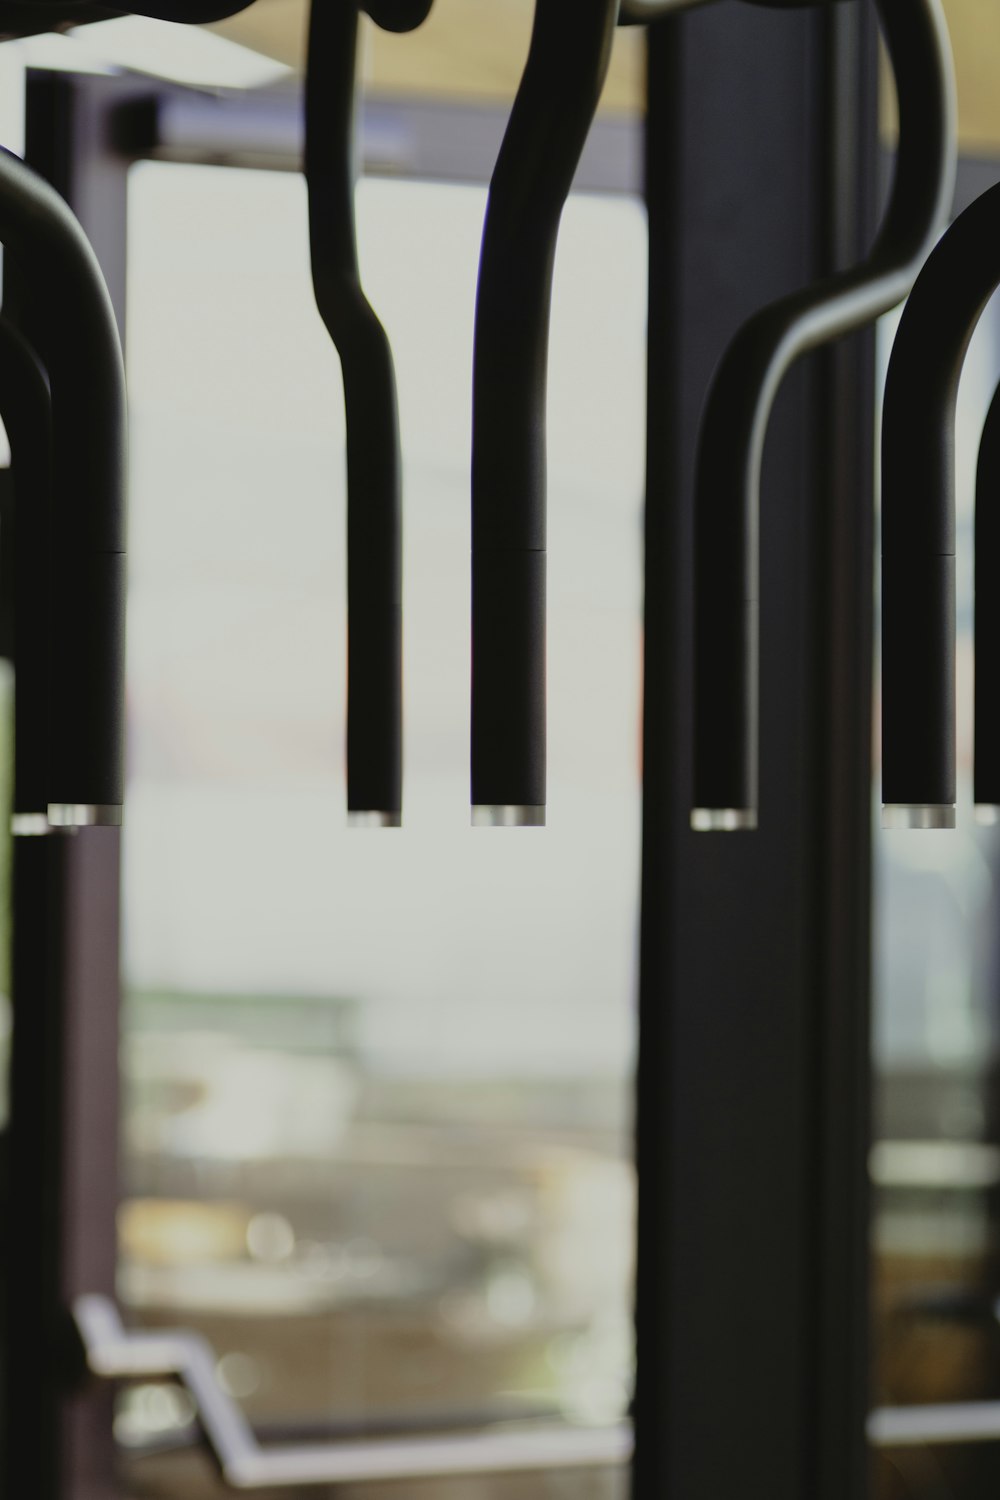 a close up of the handles of a gym machine